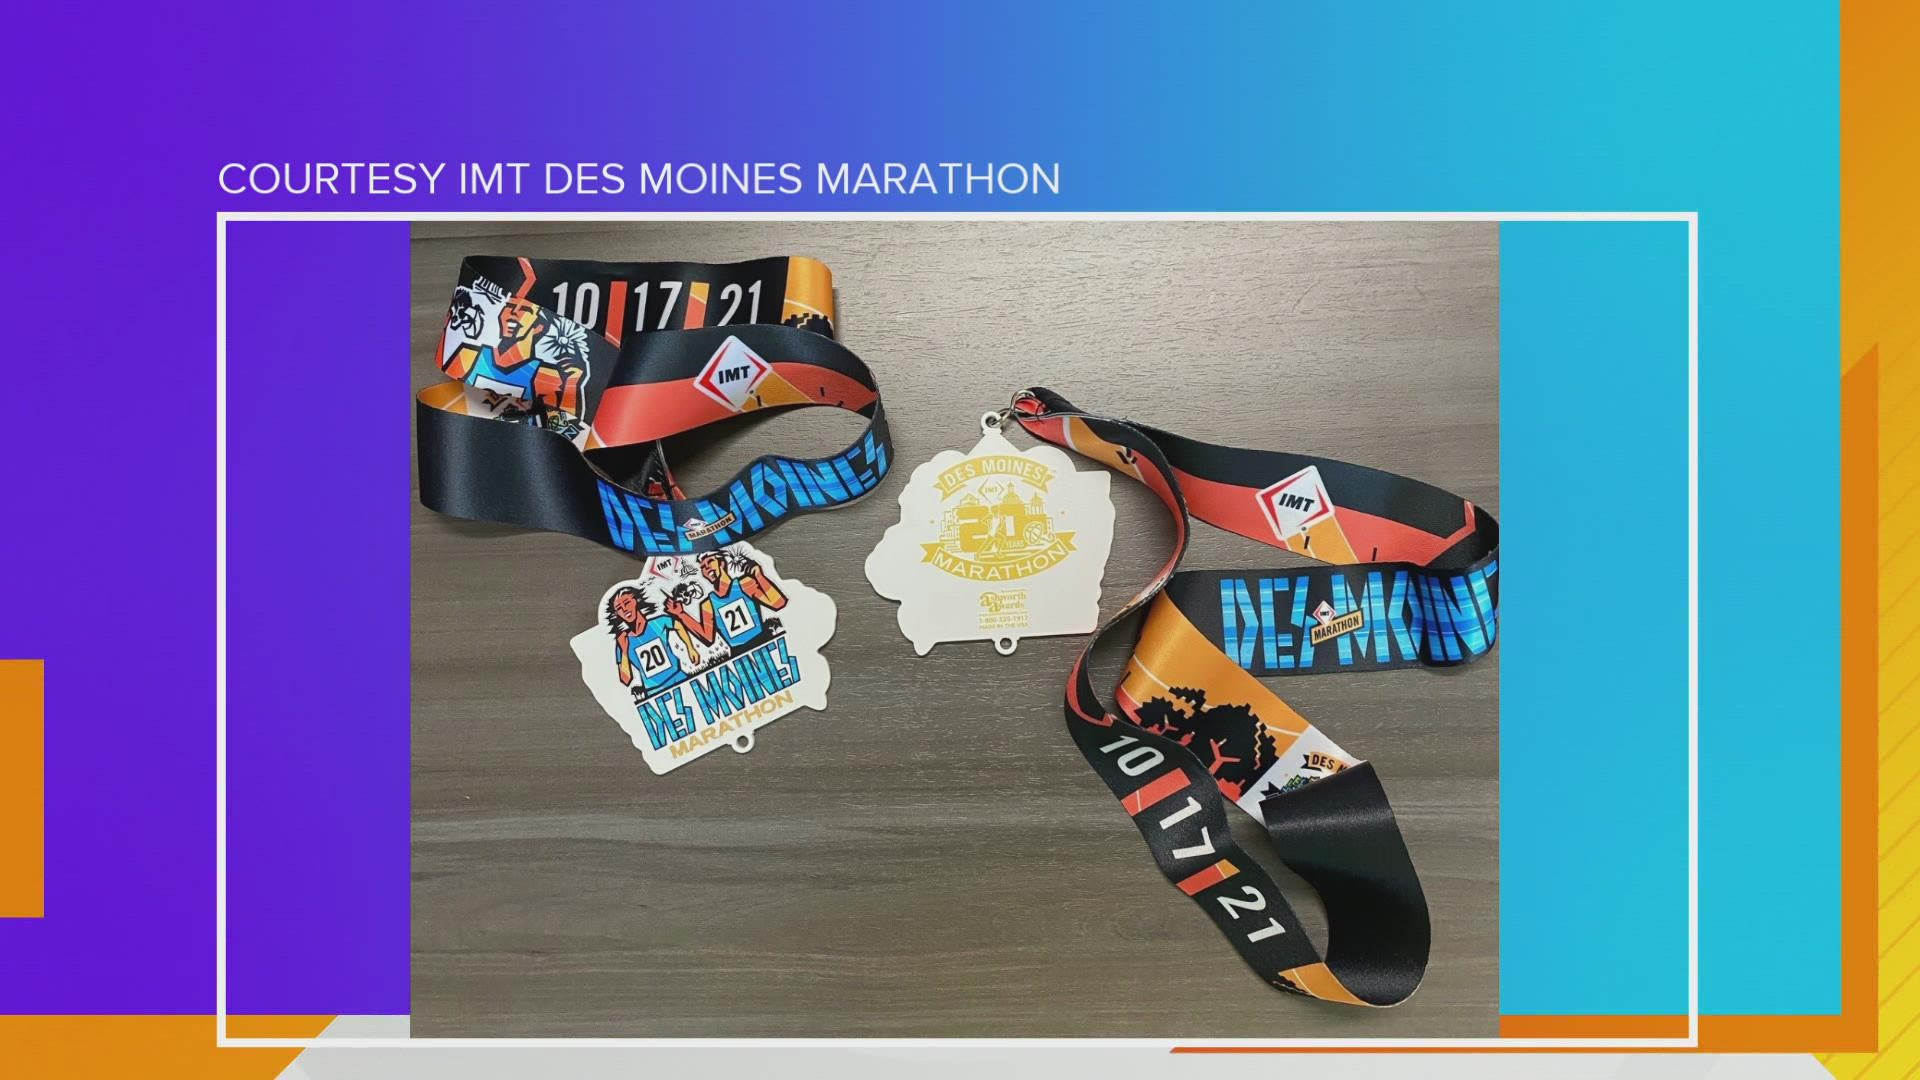 Chris Burch, Director of racing and events, IMT Des Moines Marathon has your first look at the medals handed out to participants who cross finish lines this weekend!